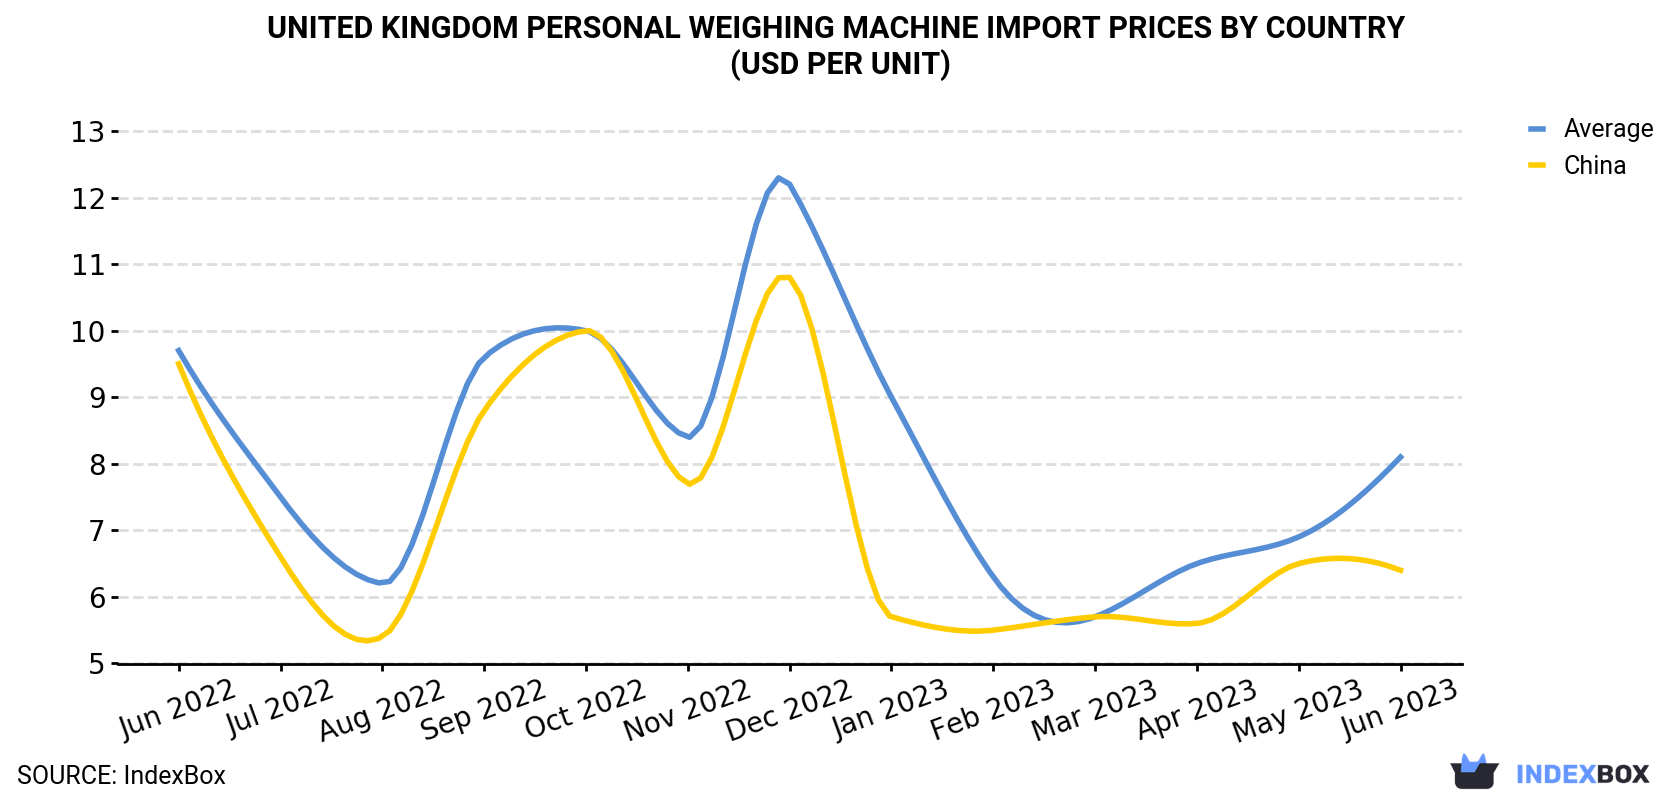 United Kingdom Personal Weighing Machine Import Prices By Country (USD Per Unit)